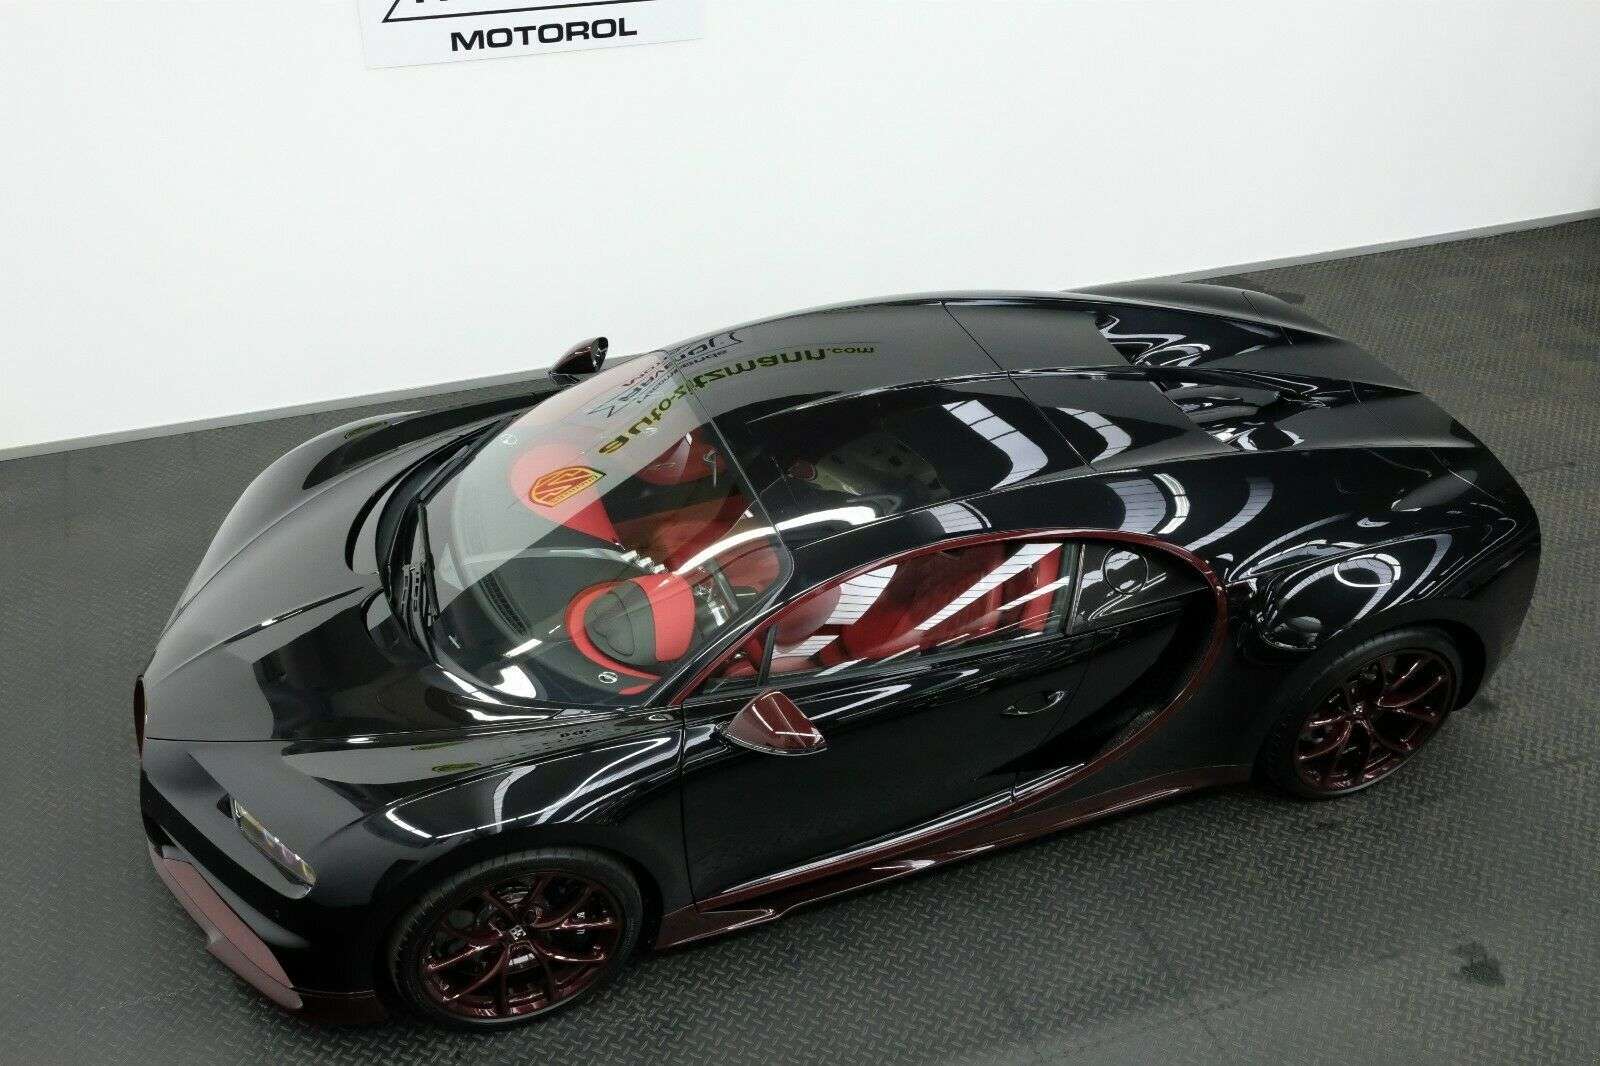 Bugatti Chiron Coupe in Black used in Nürnberg for € 3,790,000.-